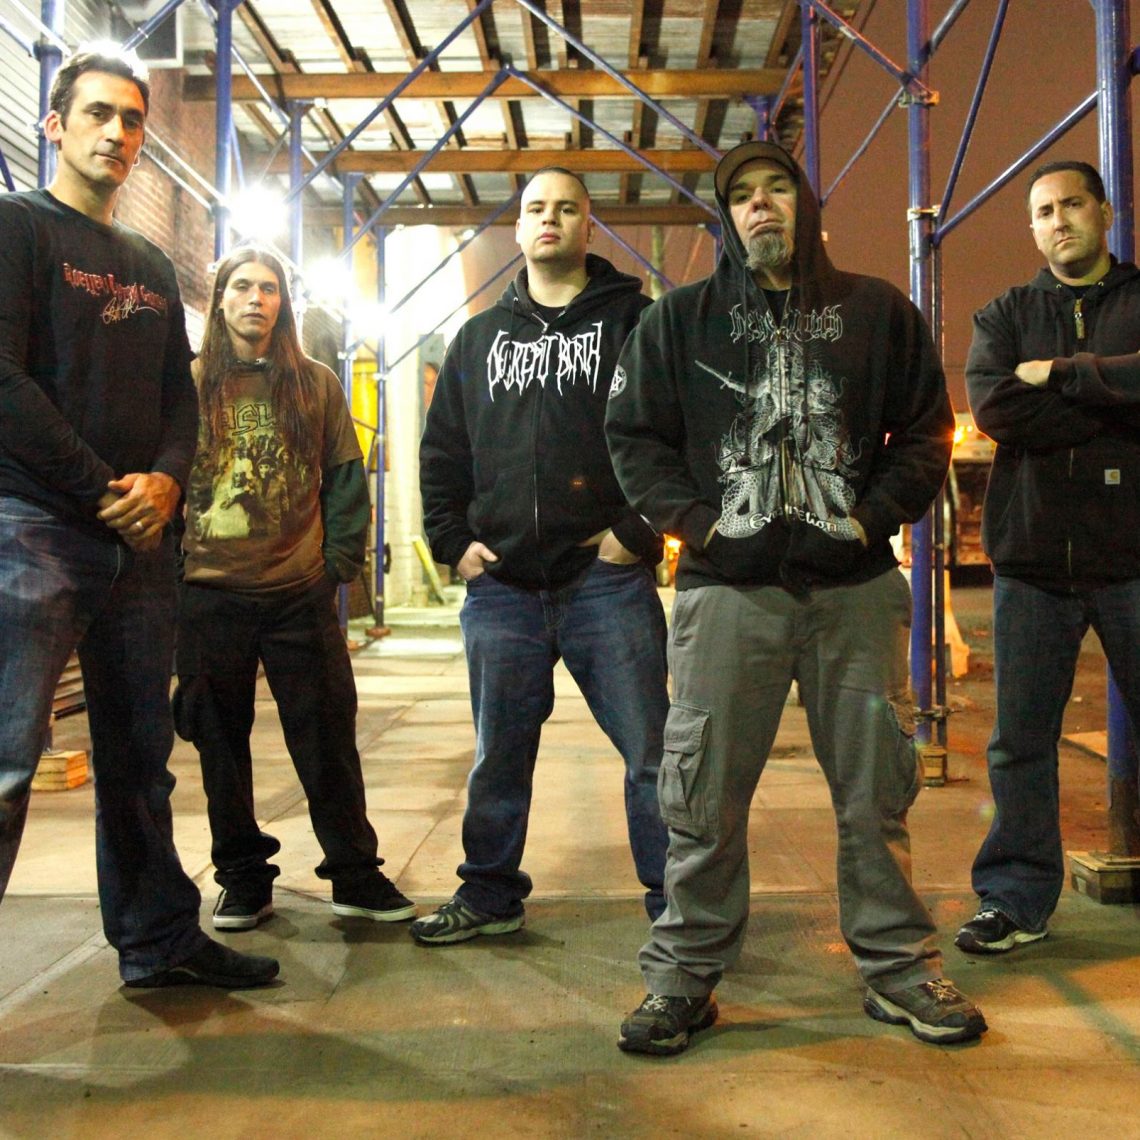 Internal Bleeding – New Recording Contract and New Album Details